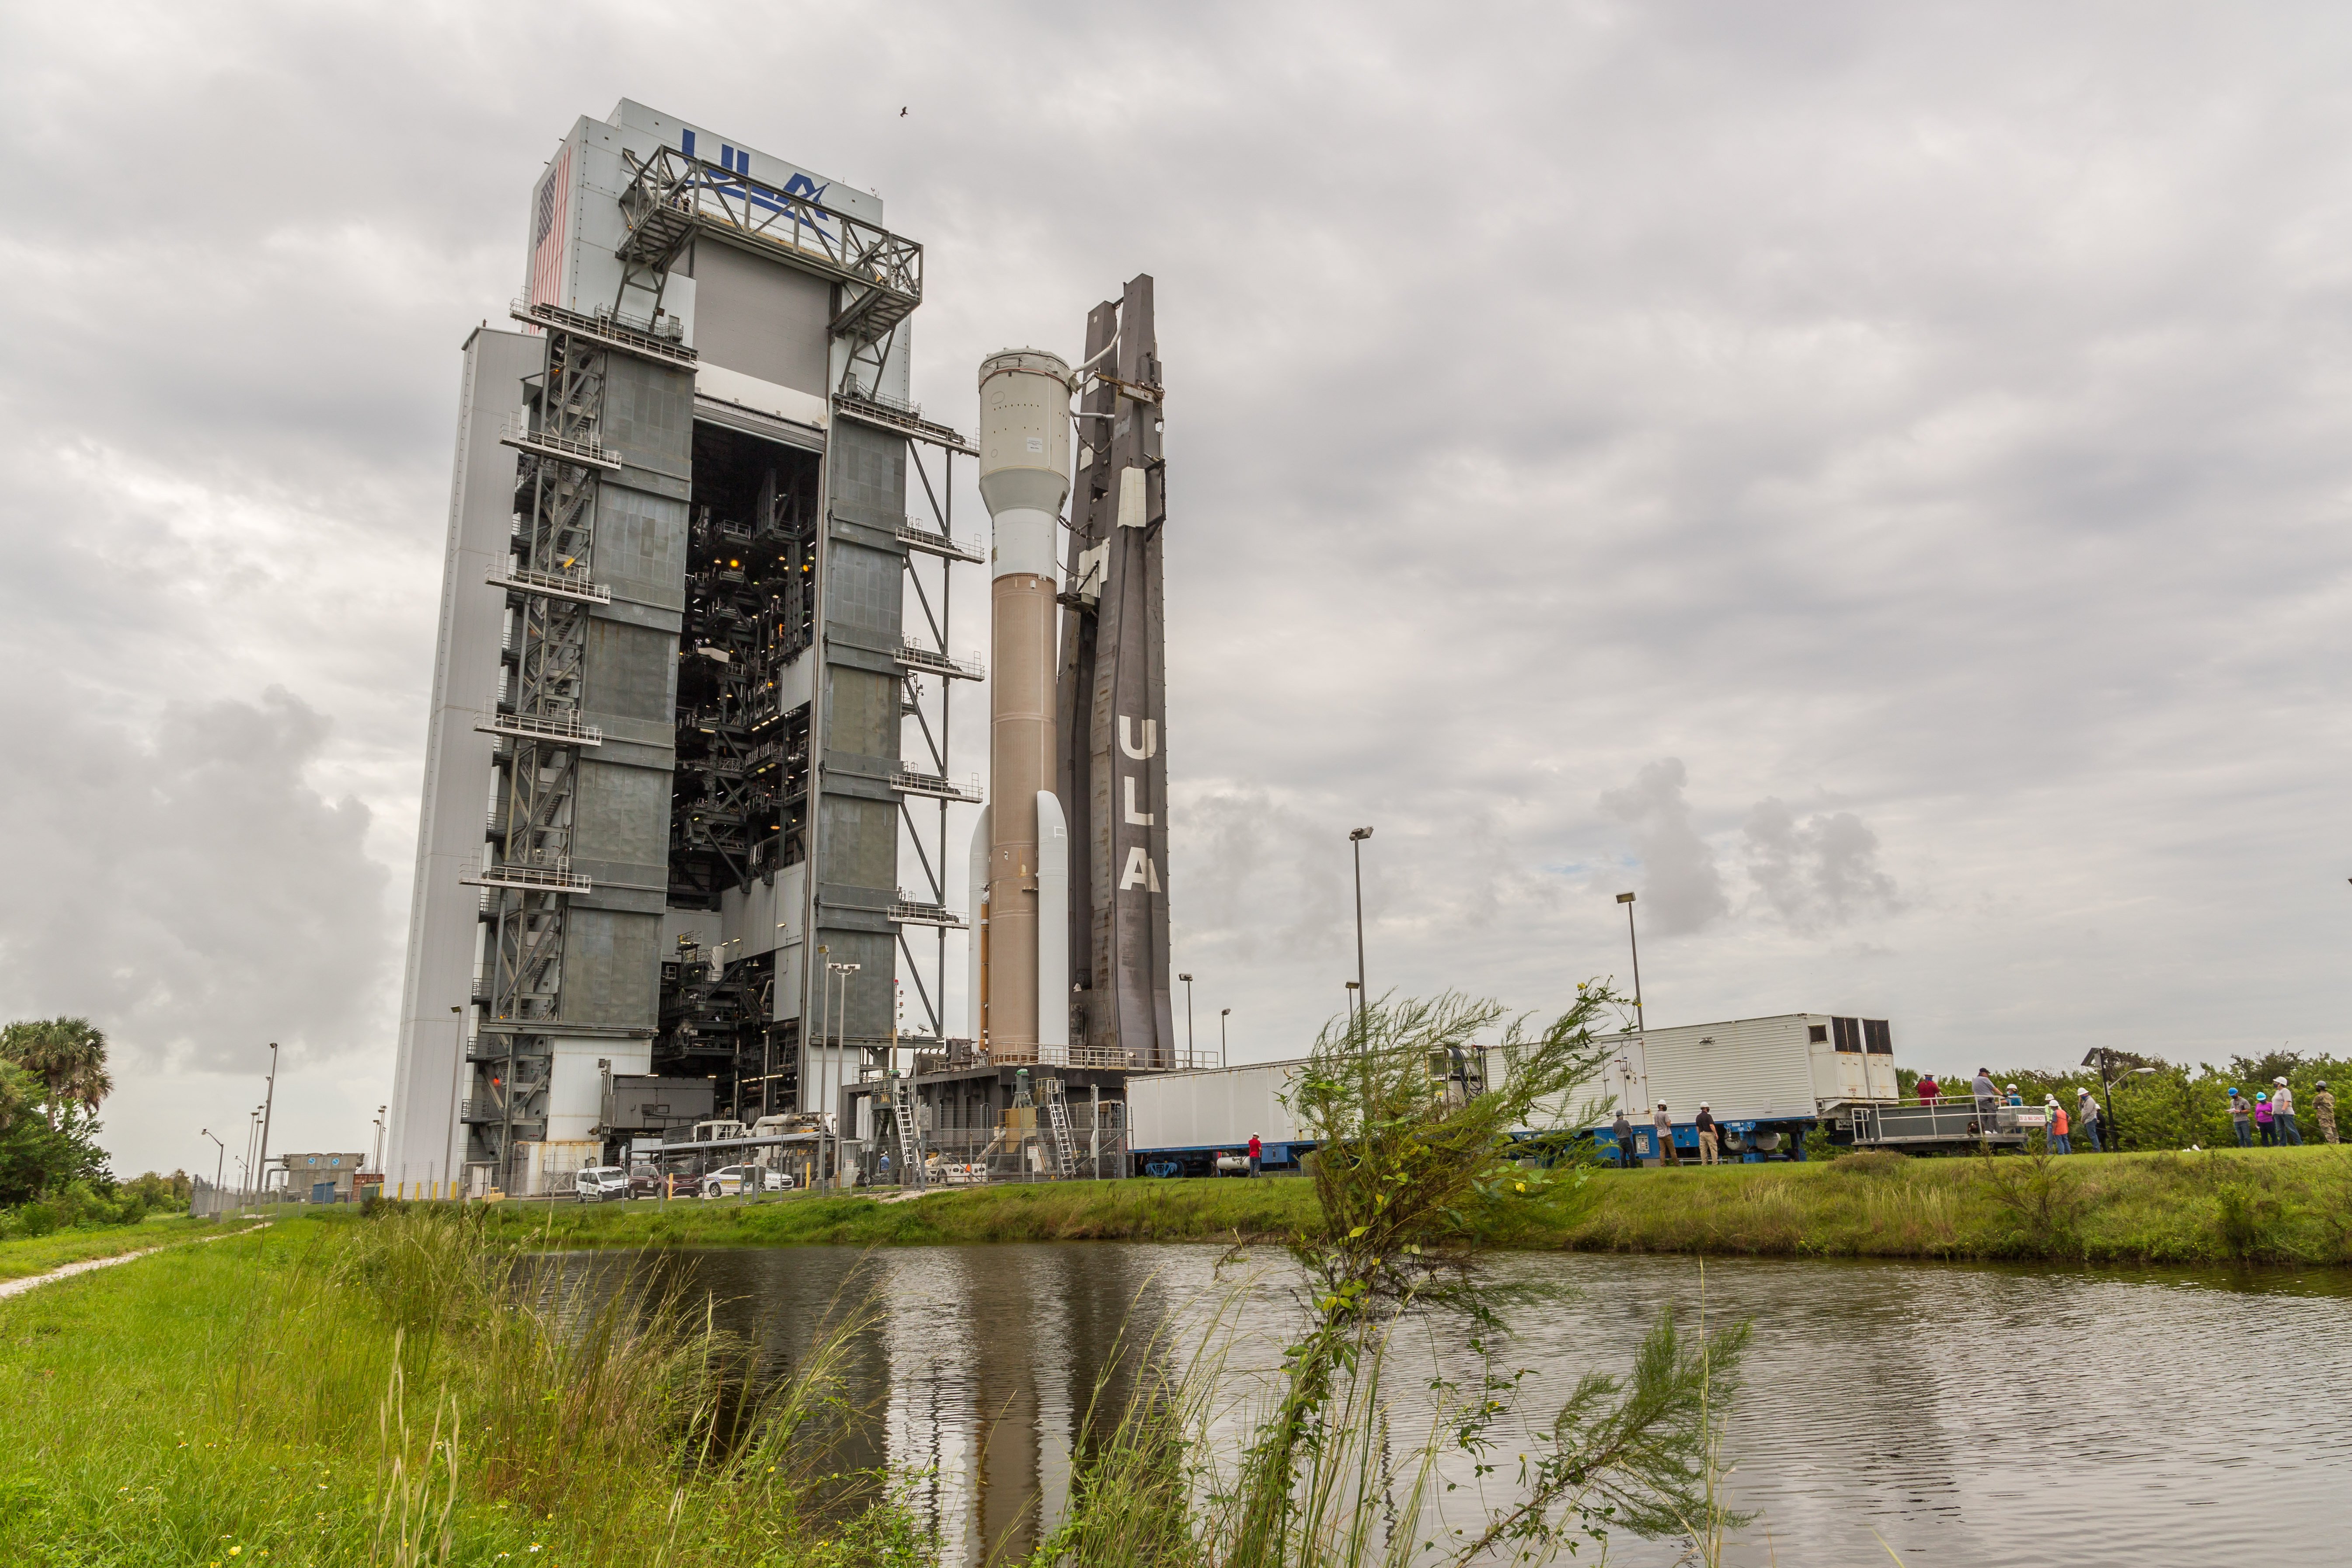 The Atlas V rocket completes the Wet Dress Rehearsal for the NROL-101 mission. Photo by United Launch Alliance